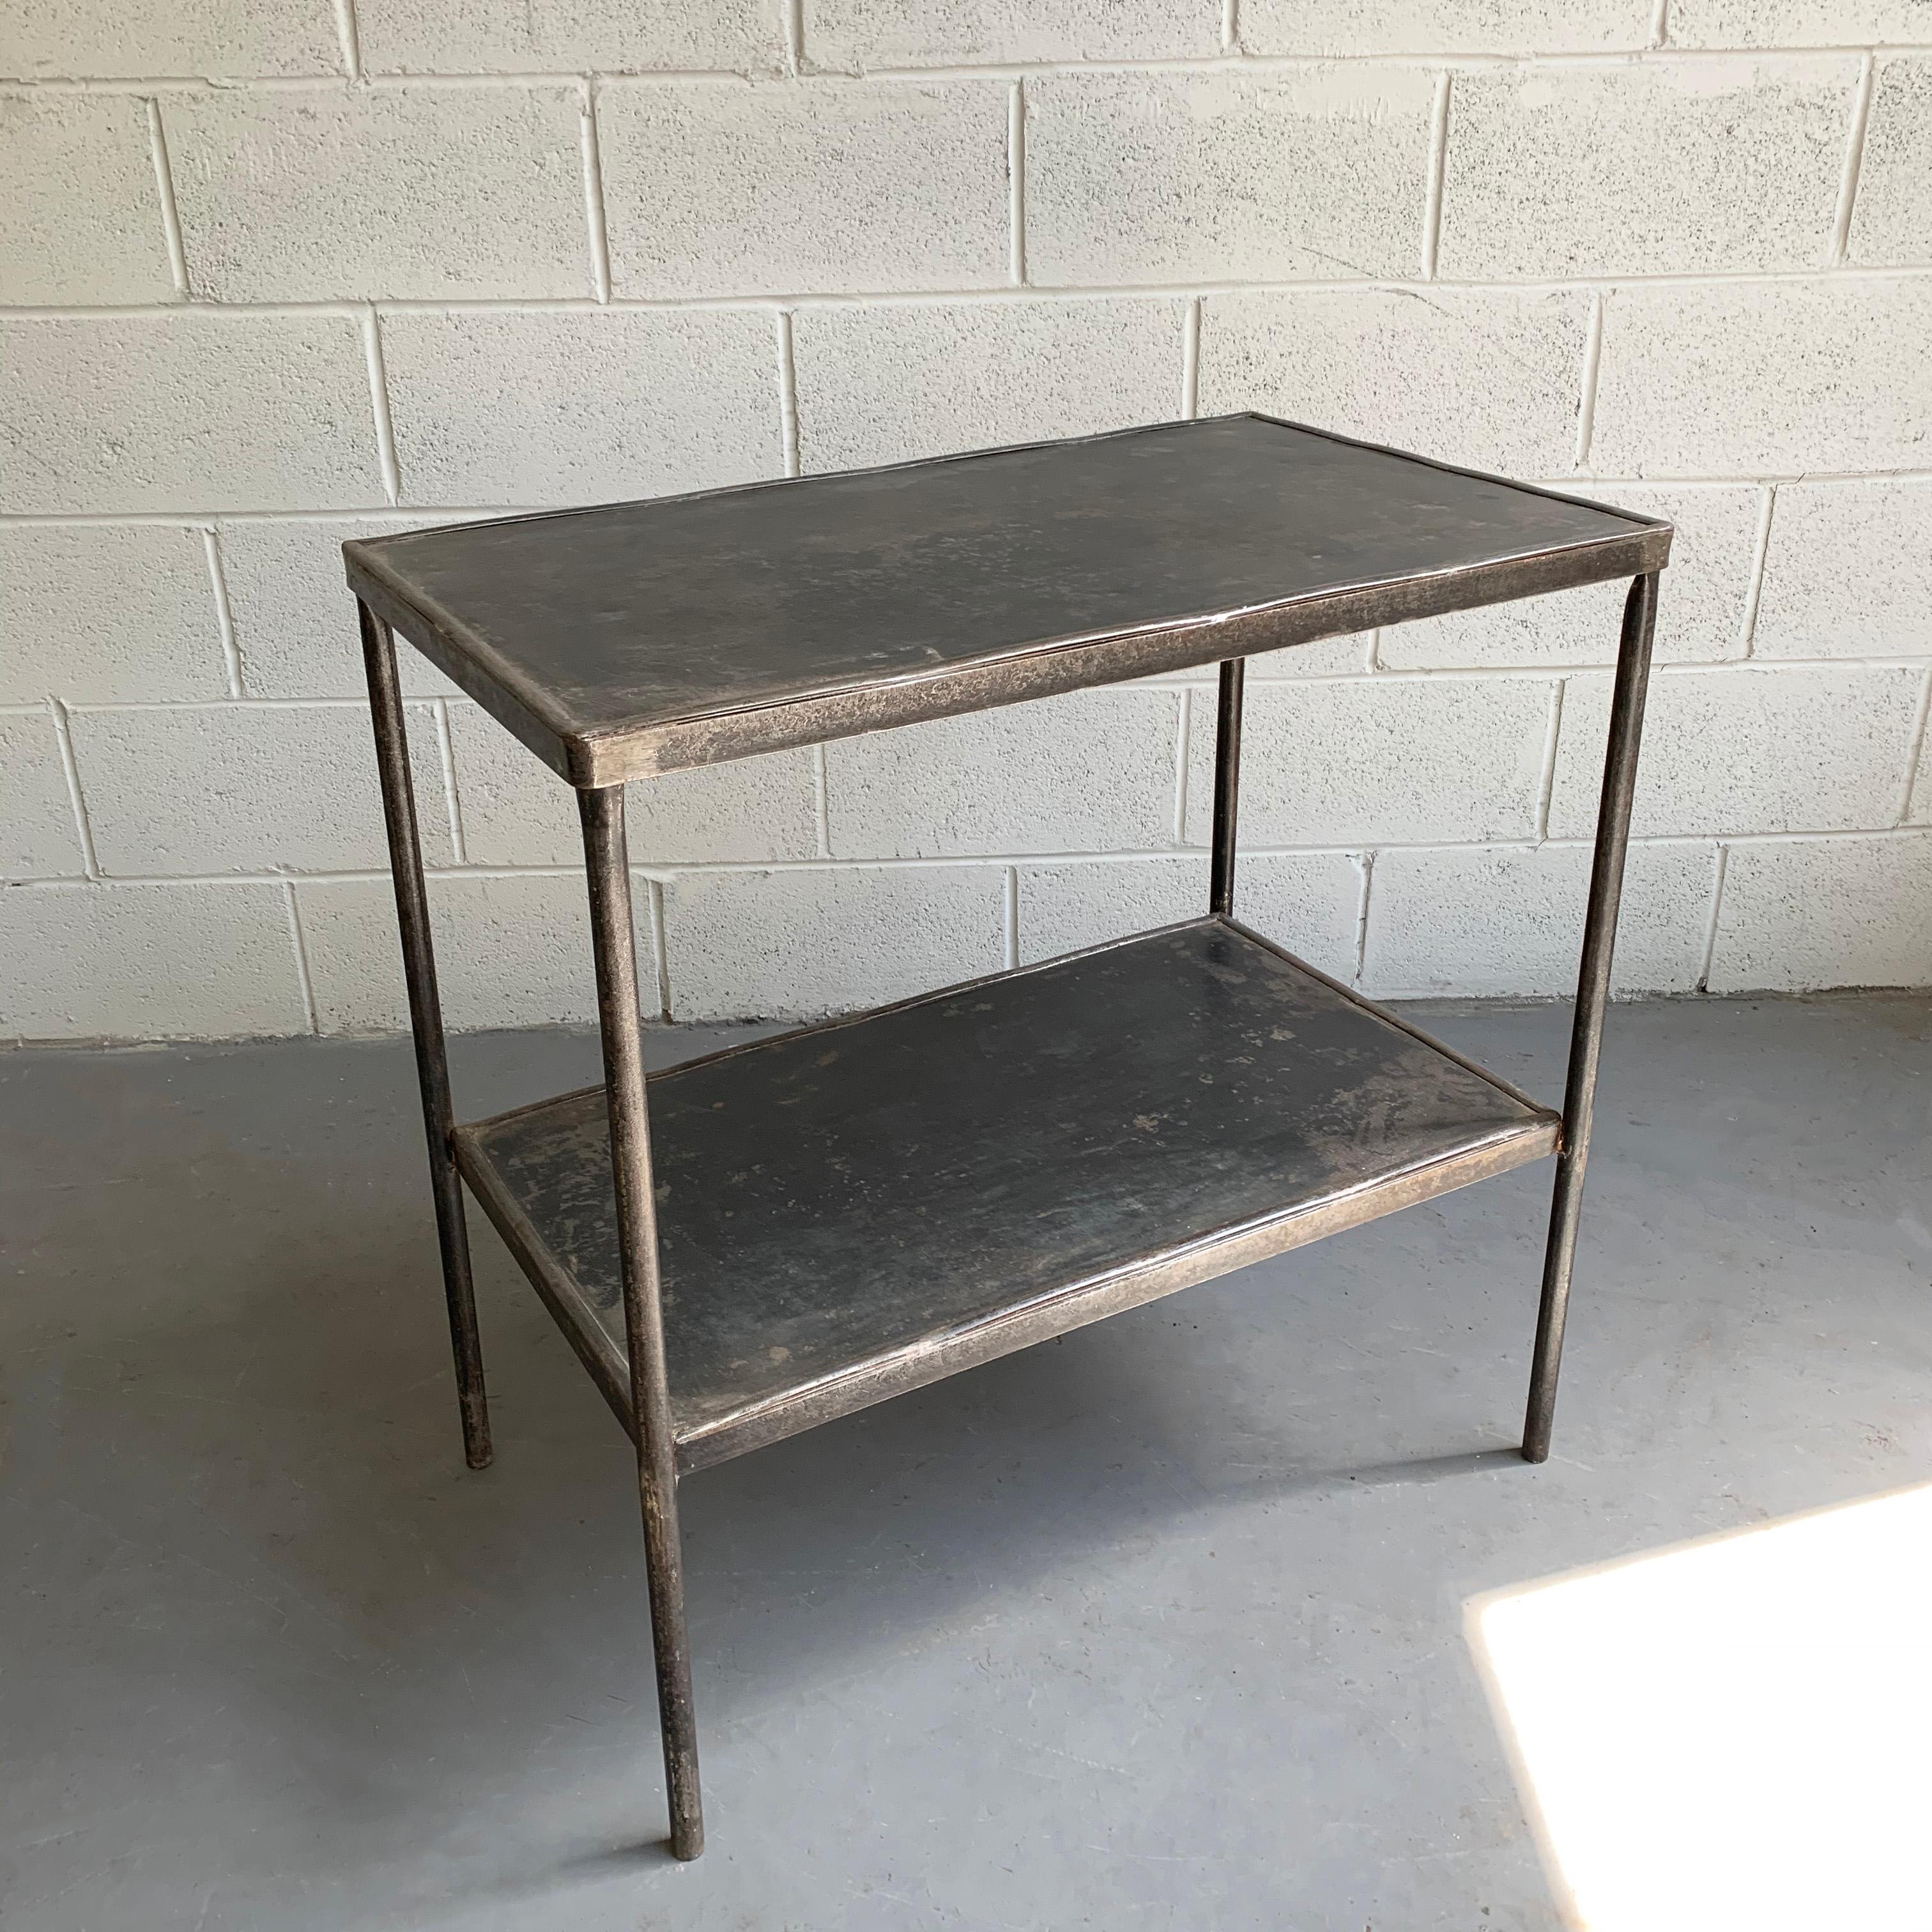 Early 20th century, industrial, brushed steel, hospital prep table features a lower tier at 13